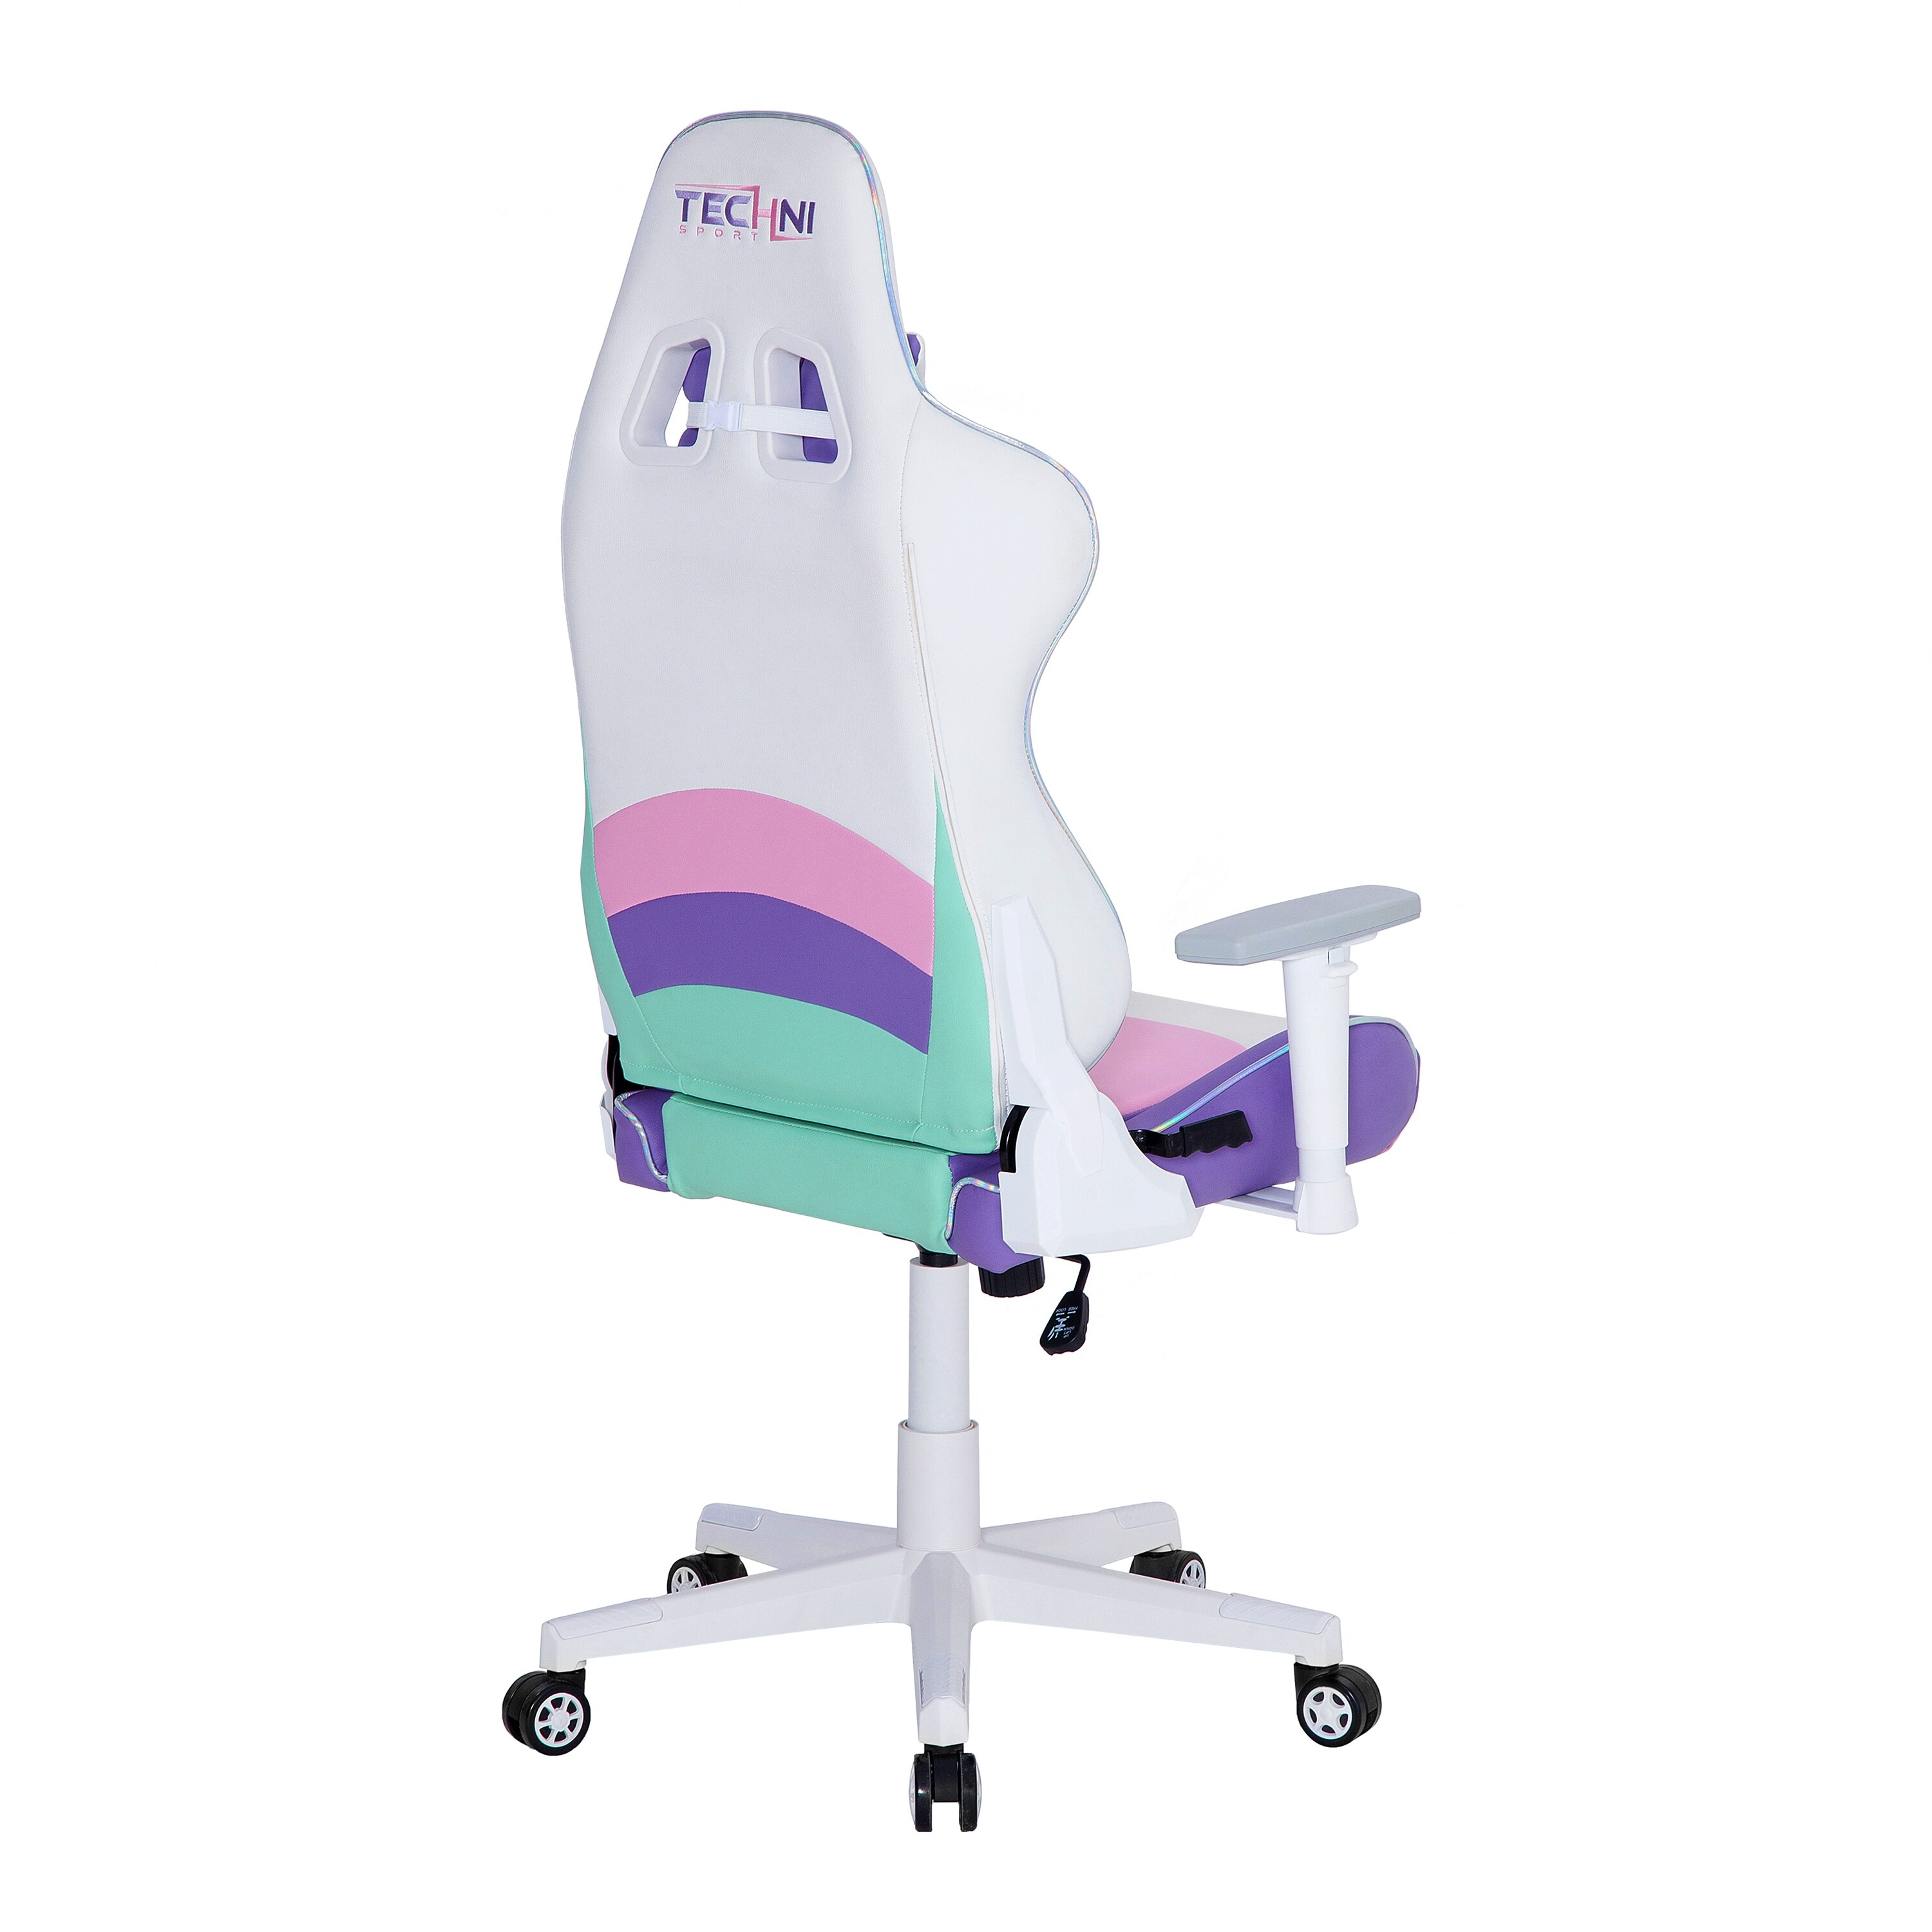 https://ak1.ostkcdn.com/images/products/is/images/direct/260d42020ccebef1b513e676877702081ef3574f/Kawaii-Gaming-Chair-Office-Adjustable-Desk-Neck-Heart-Shaped-Pillow.jpg